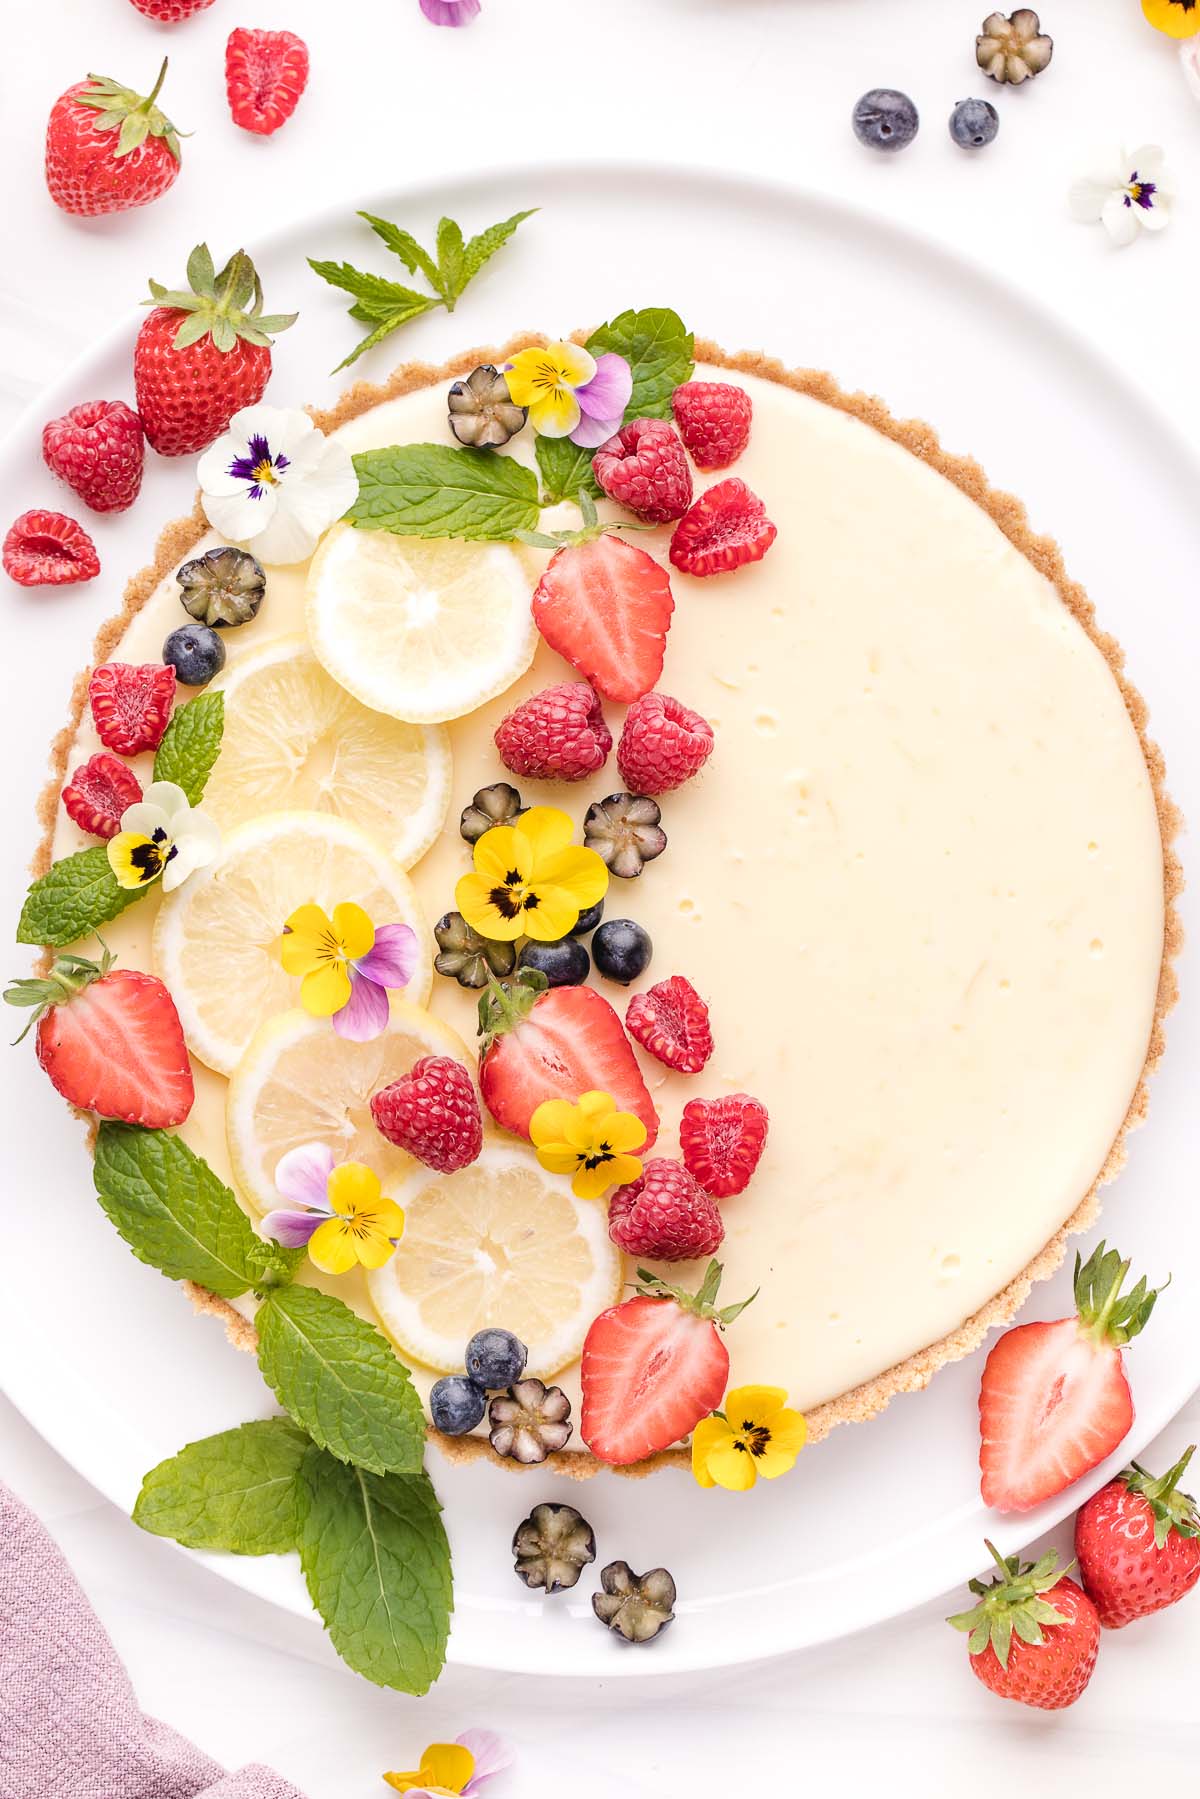 A citrus tart topped with fresh berries, lemon slices, and edible flowers on a white background.